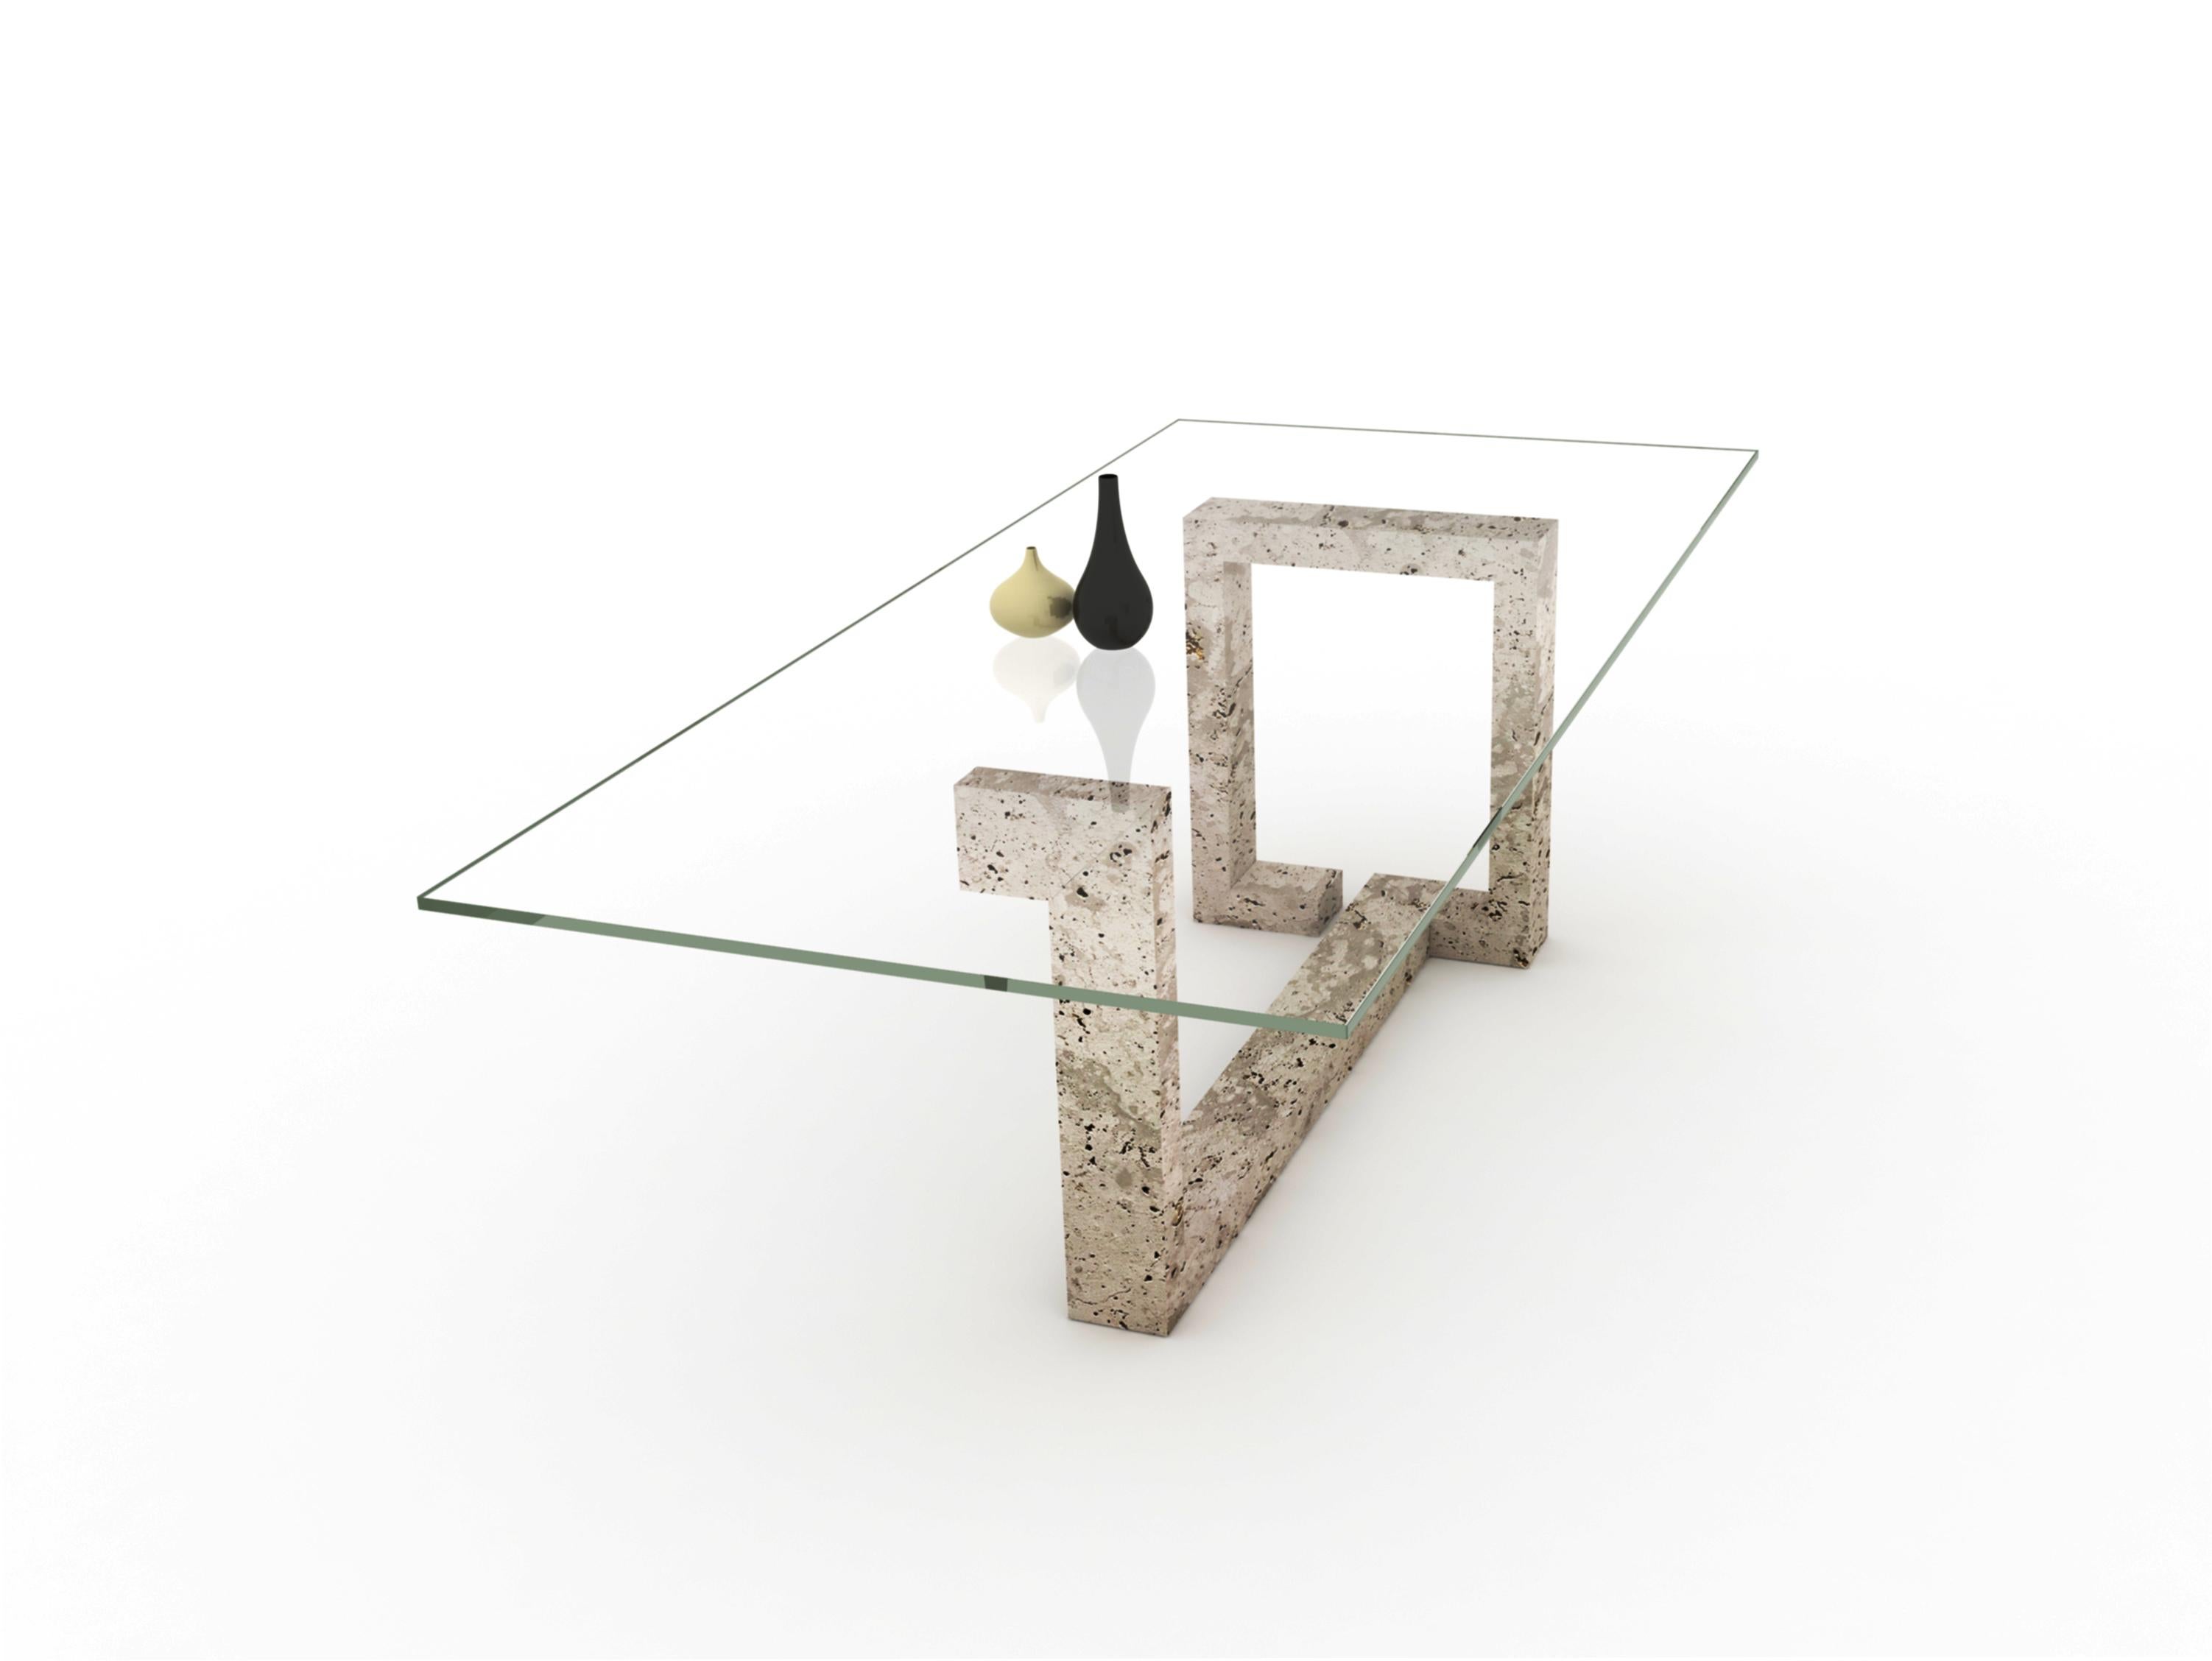 The OTEYZA dining table in travertine marble is designed by Joaquín Moll for Archivo Collection Meddel. A linear marble structure with a transparent glass surface. An artistic and sculptural table design.

OTEYZA is a sculptural table with light